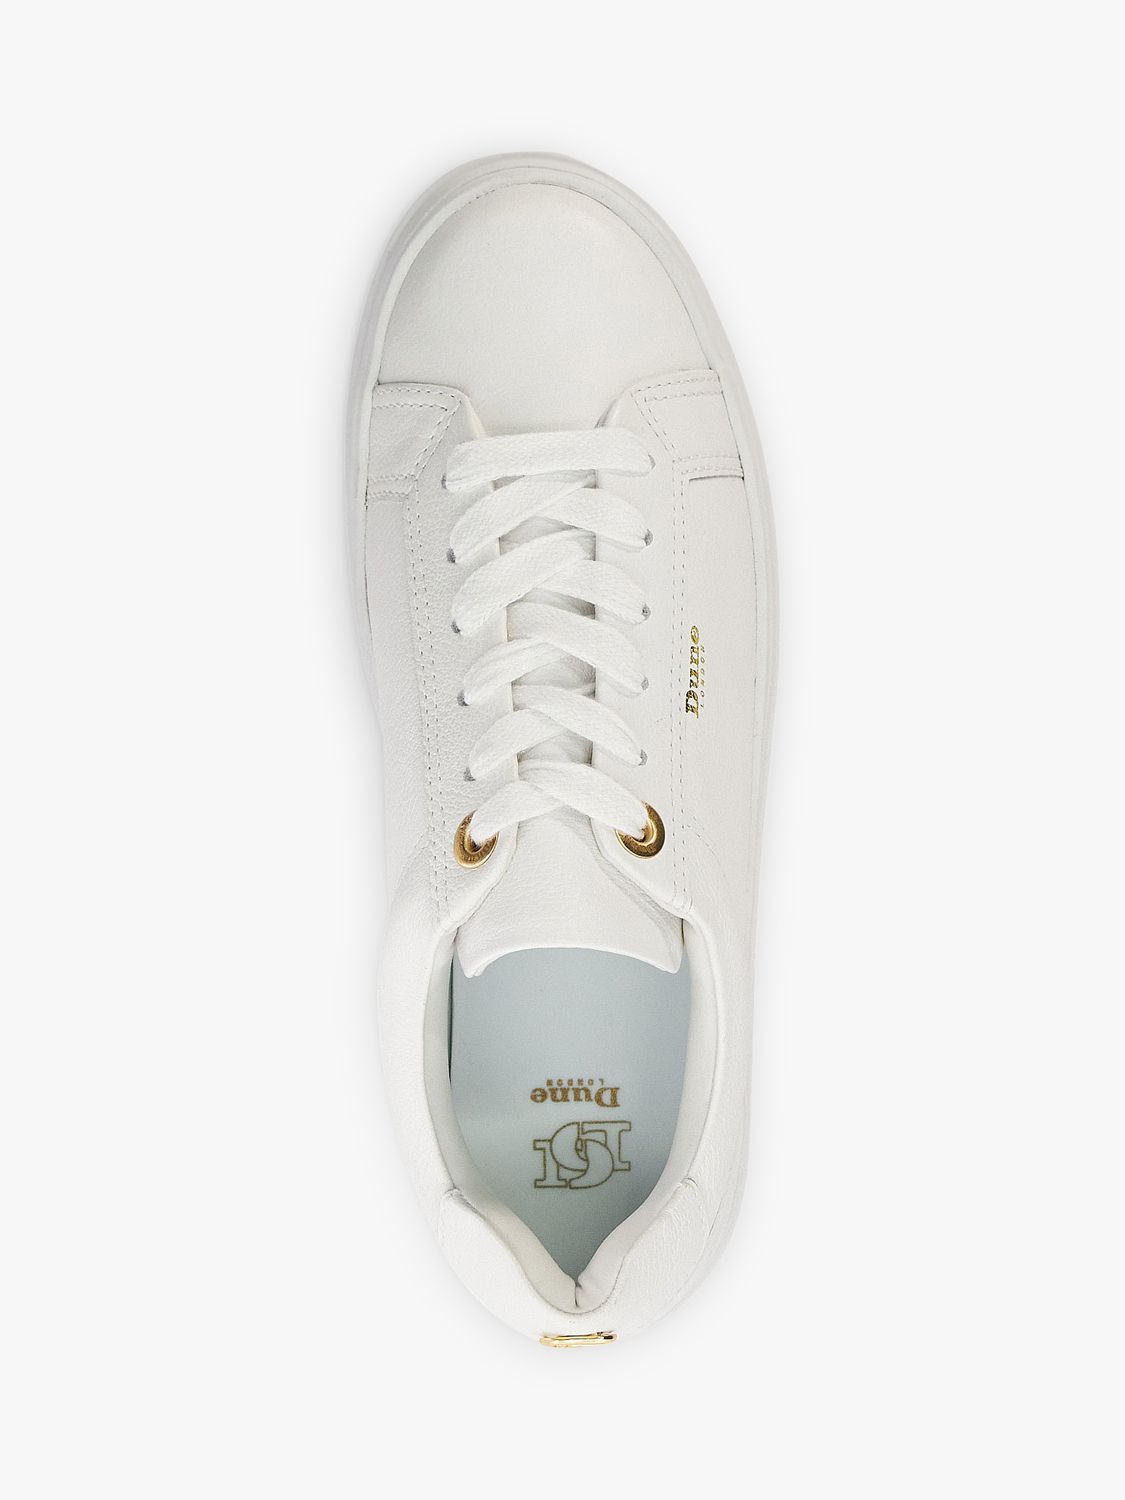 Buy Dune Eastern Leather Platform Trainers, White Online at johnlewis.com